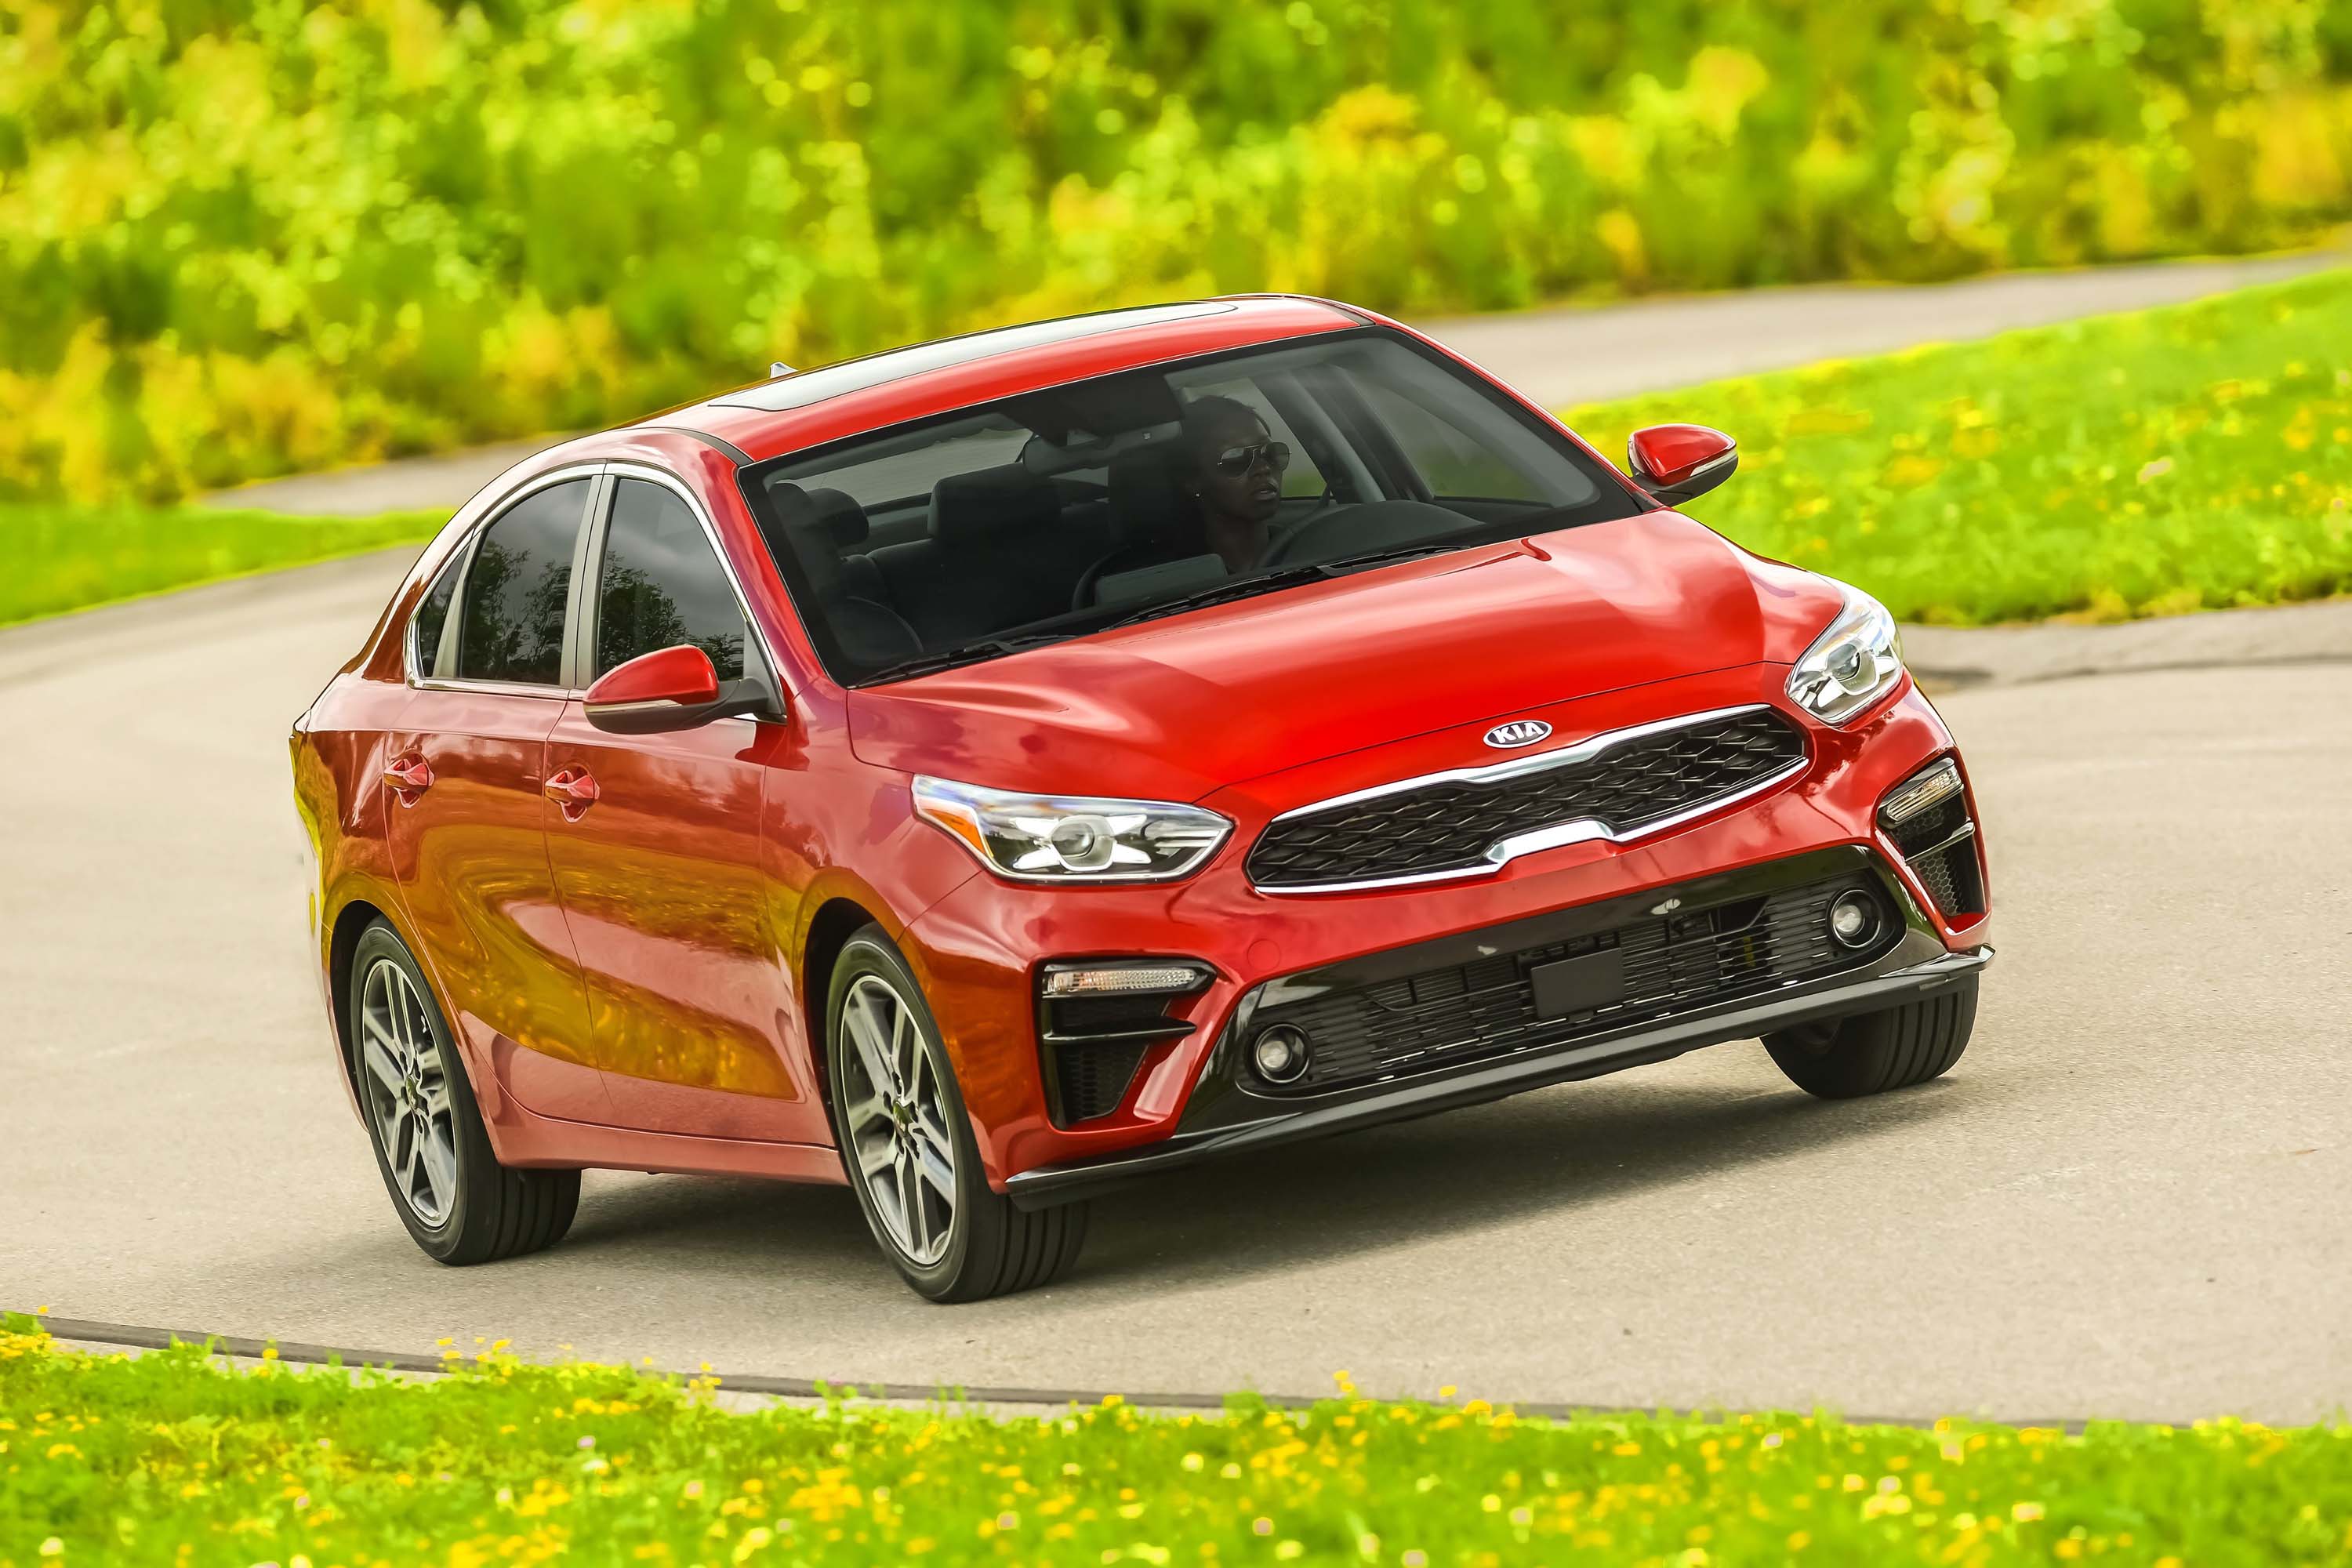 2019 Kia Forte Review, Ratings, Specs, Prices, and Photos - The Car